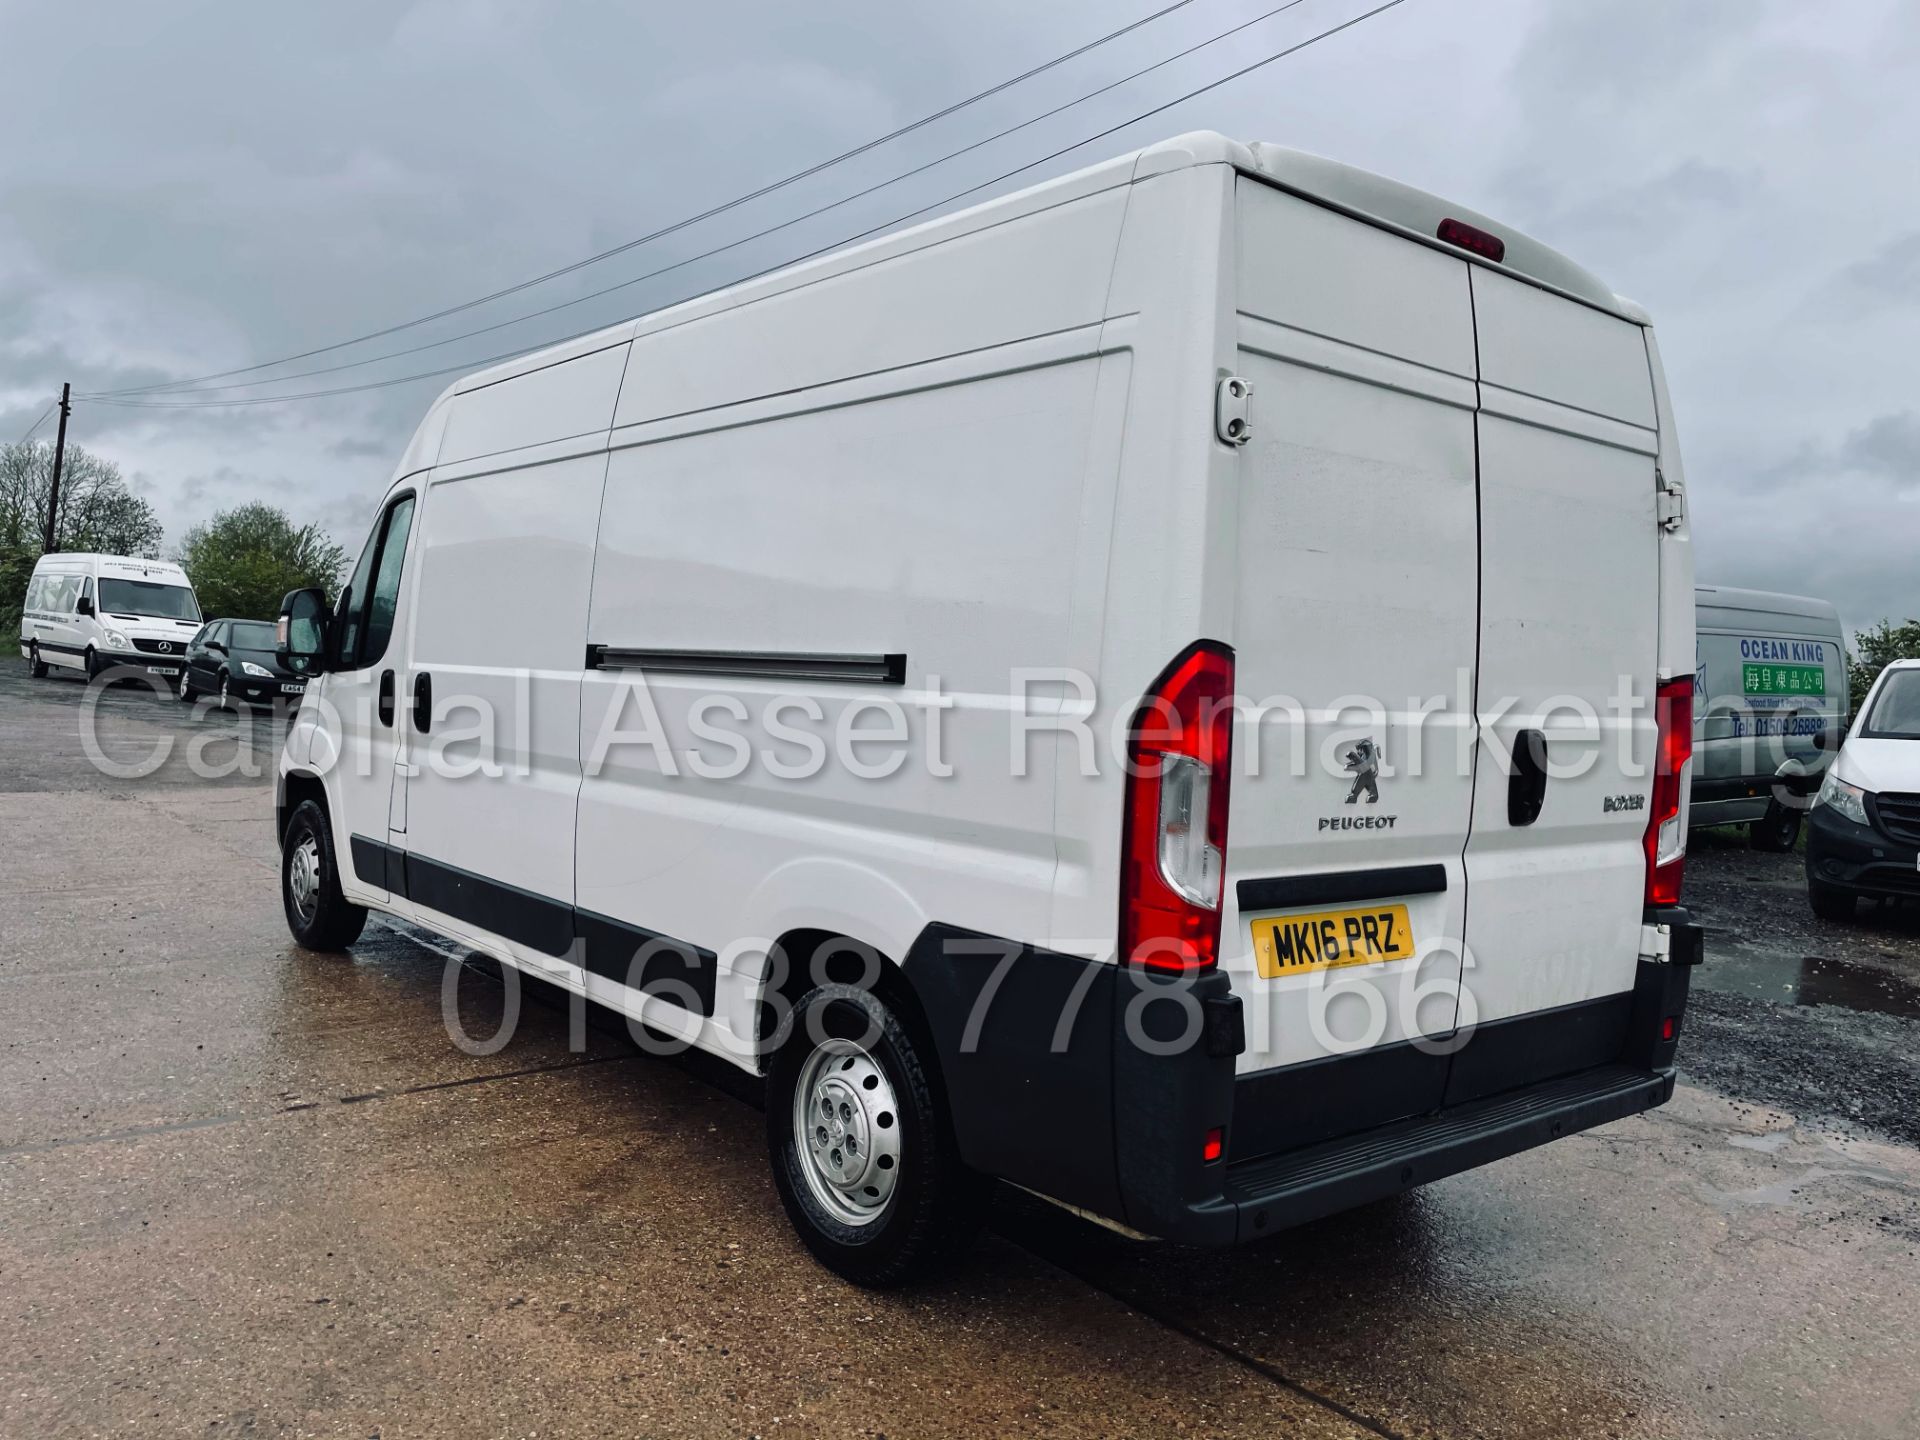 (On Sale) PEUGEOT BOXER 335 *PROFESSIONAL* LWB HI-ROOF (2016) '2.2 HDI - 6 SPEED' *A/C* (1 OWNER) - Image 10 of 41